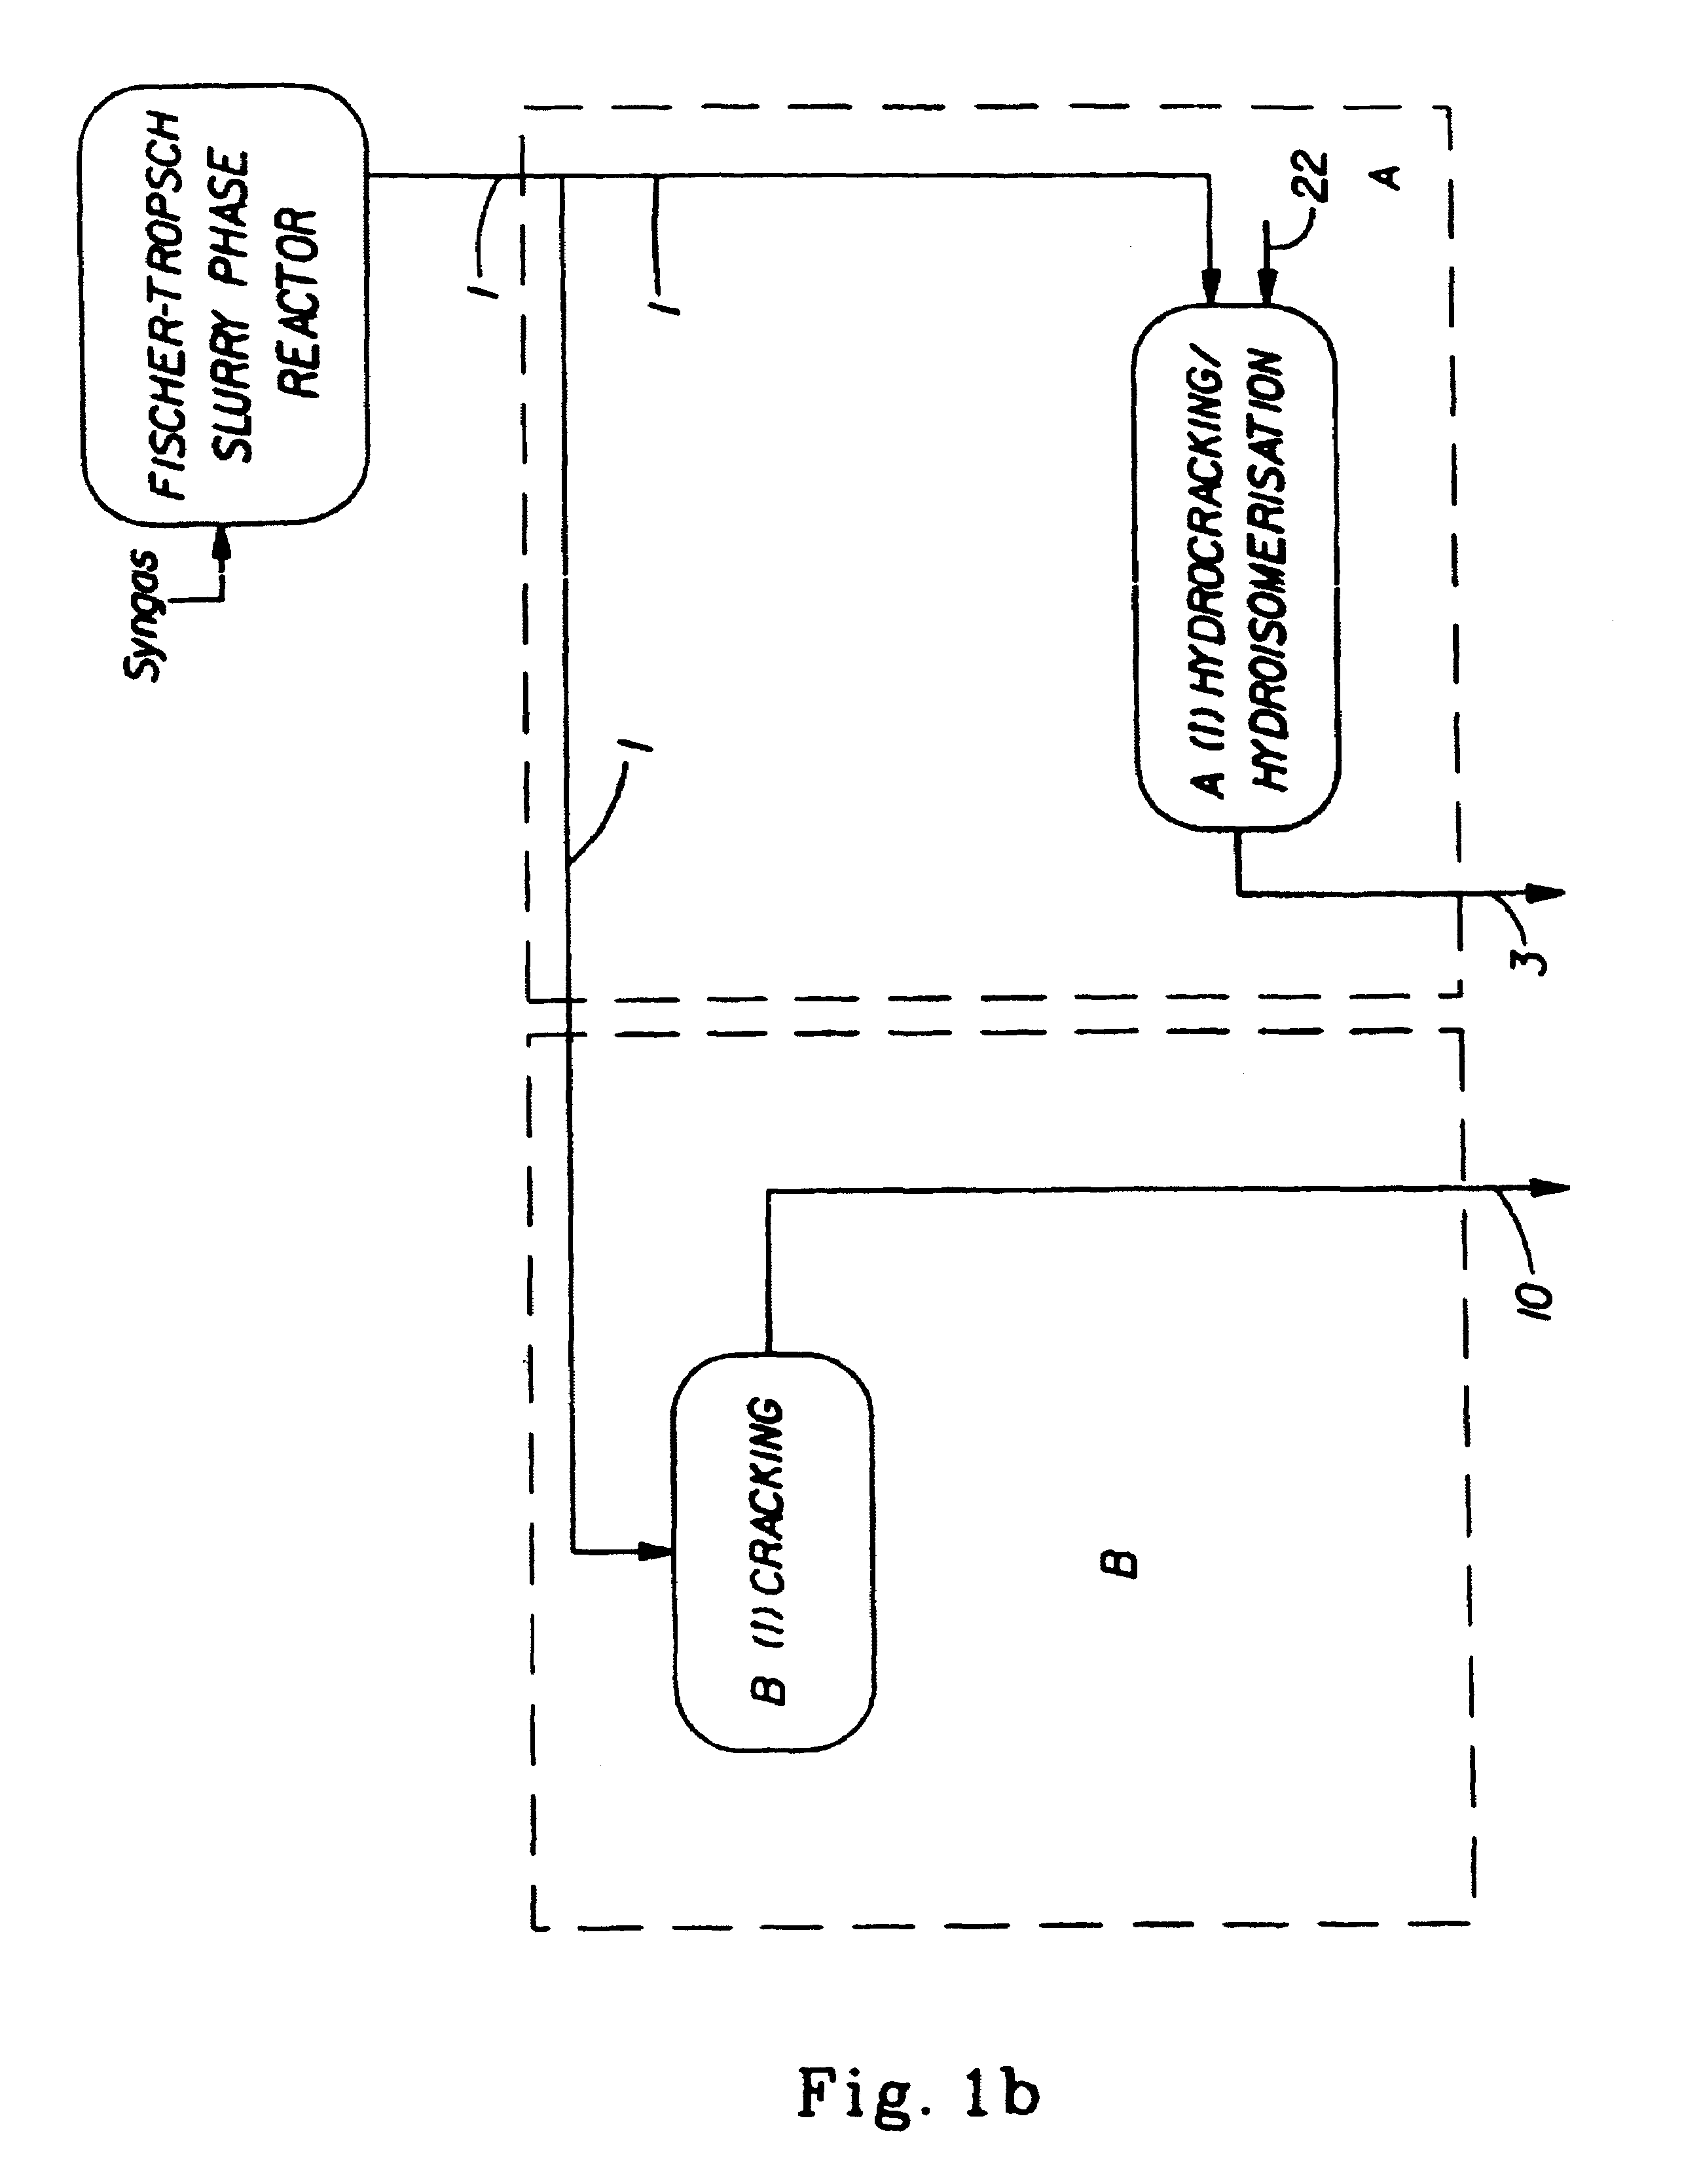 Synthetic jet fuel and diesel fuel compositions and processes